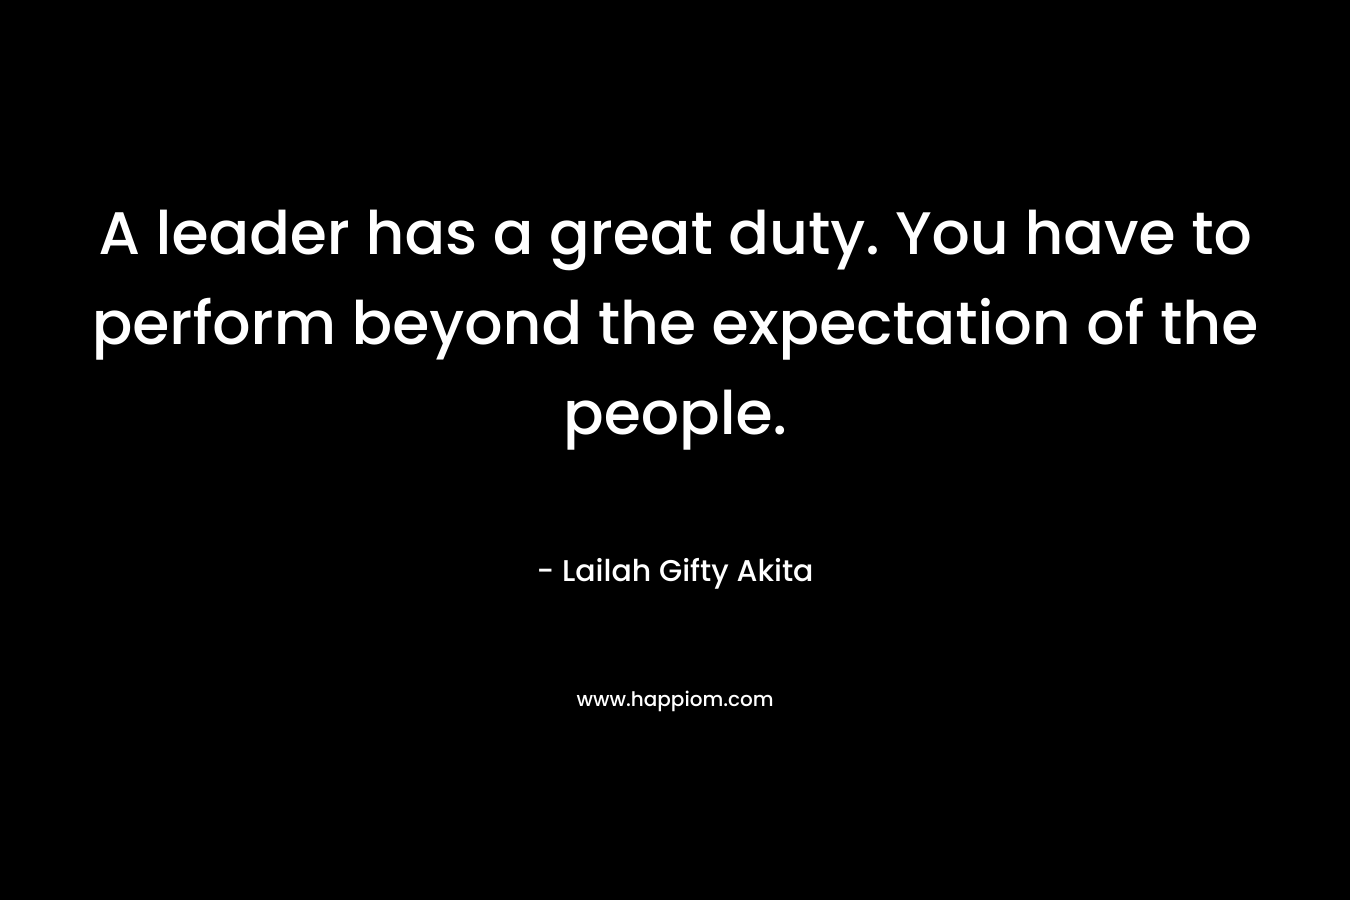 A leader has a great duty. You have to perform beyond the expectation of the people.